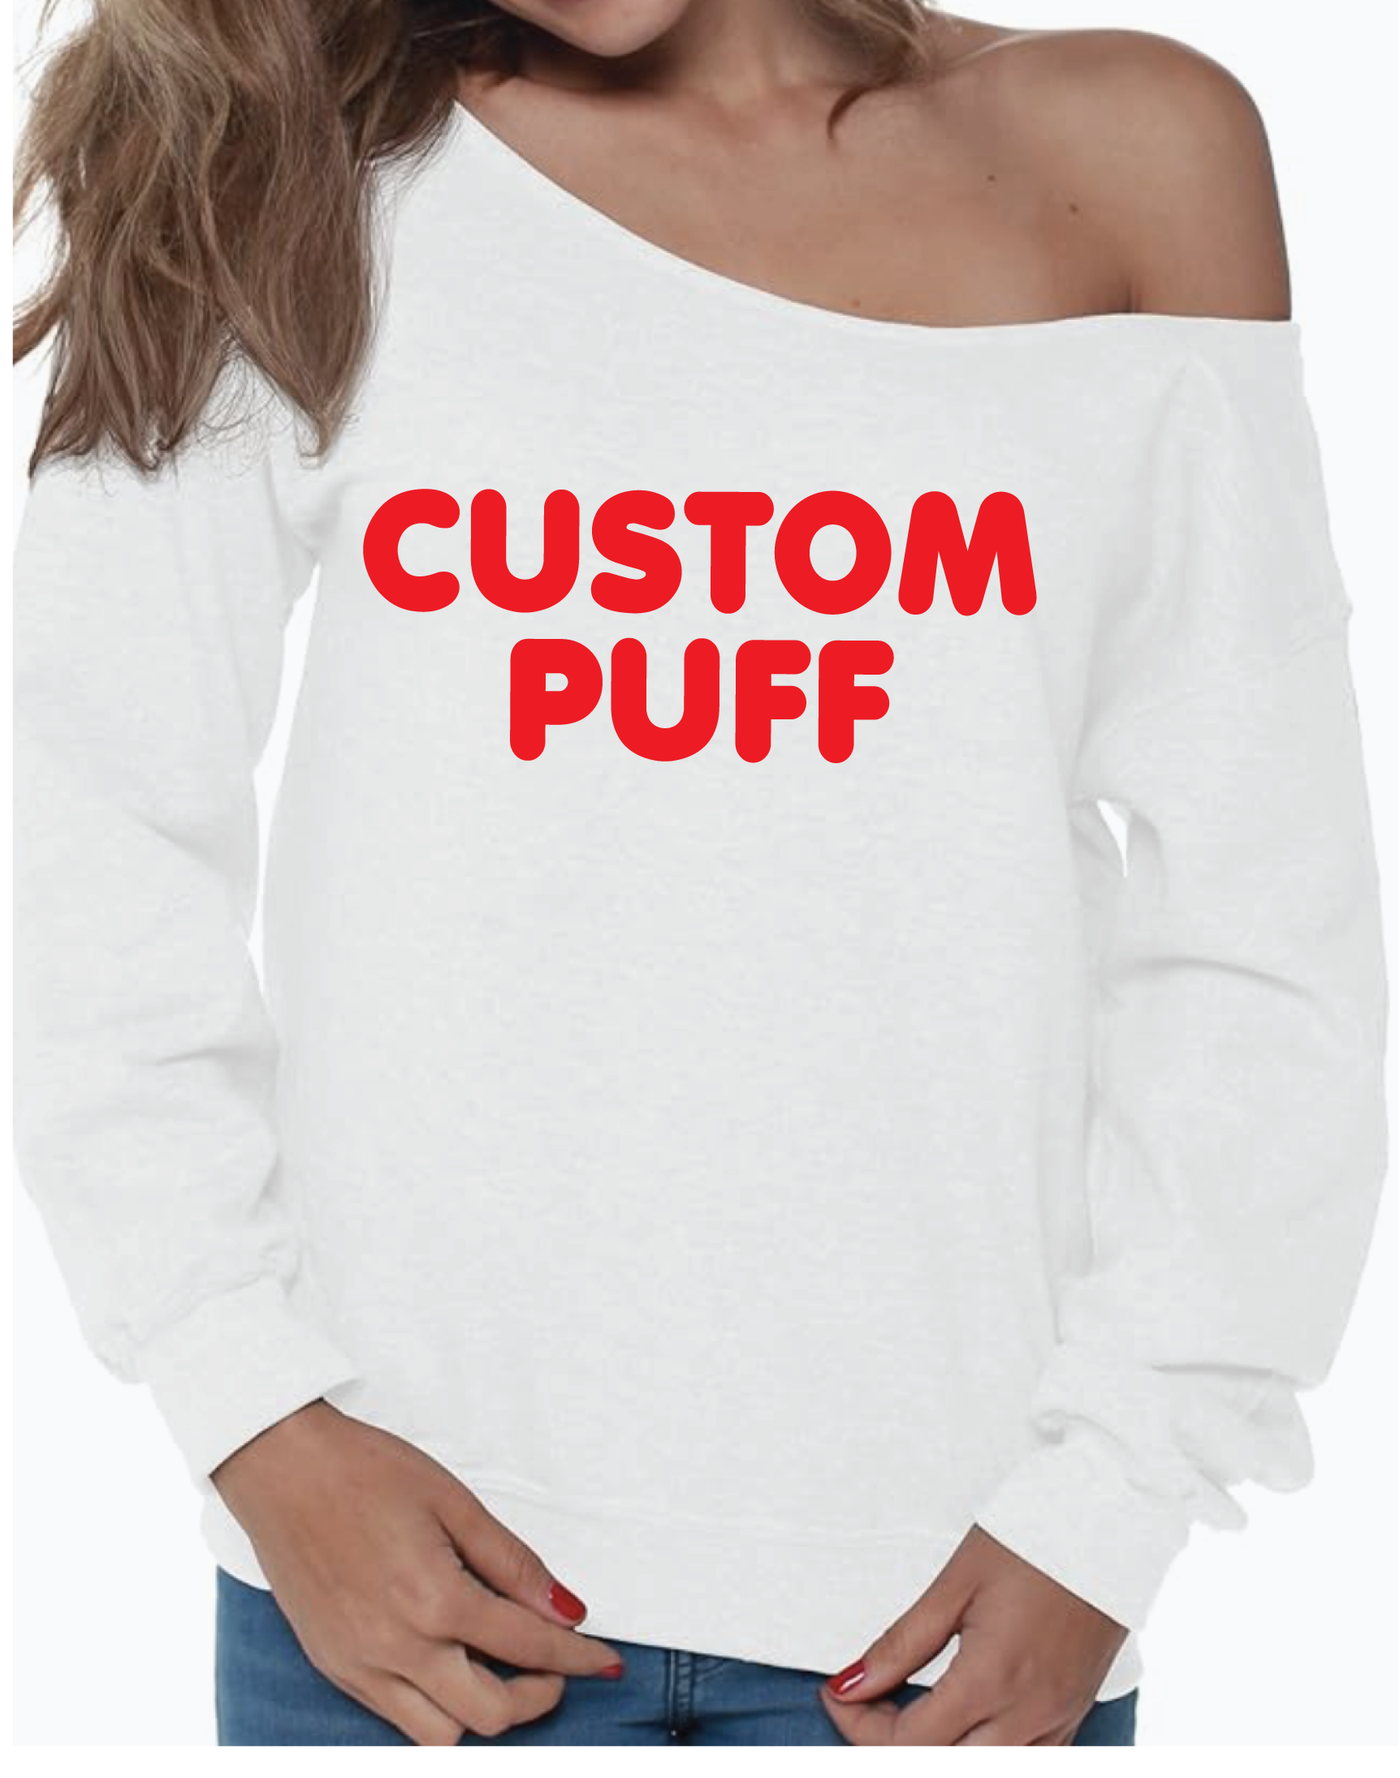 Customize Your Own Puffy Off the Shoulder College Crewneck